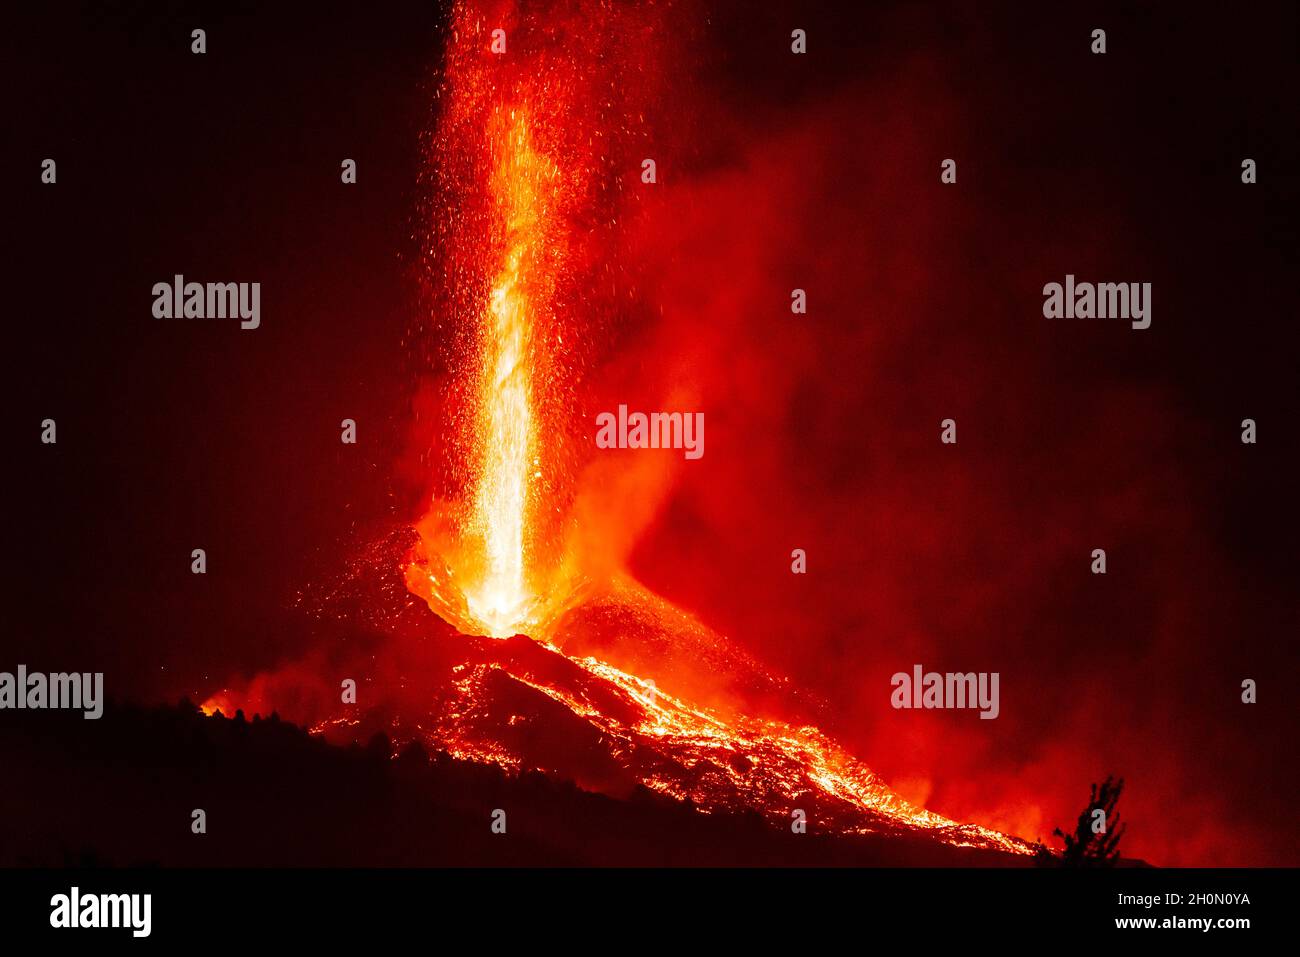 Lava fountains and multiple lava flows descend from the active crater during the volcano eruption on La Palma Island, Canary Islands, Spain, in Sep 21 Stock Photo